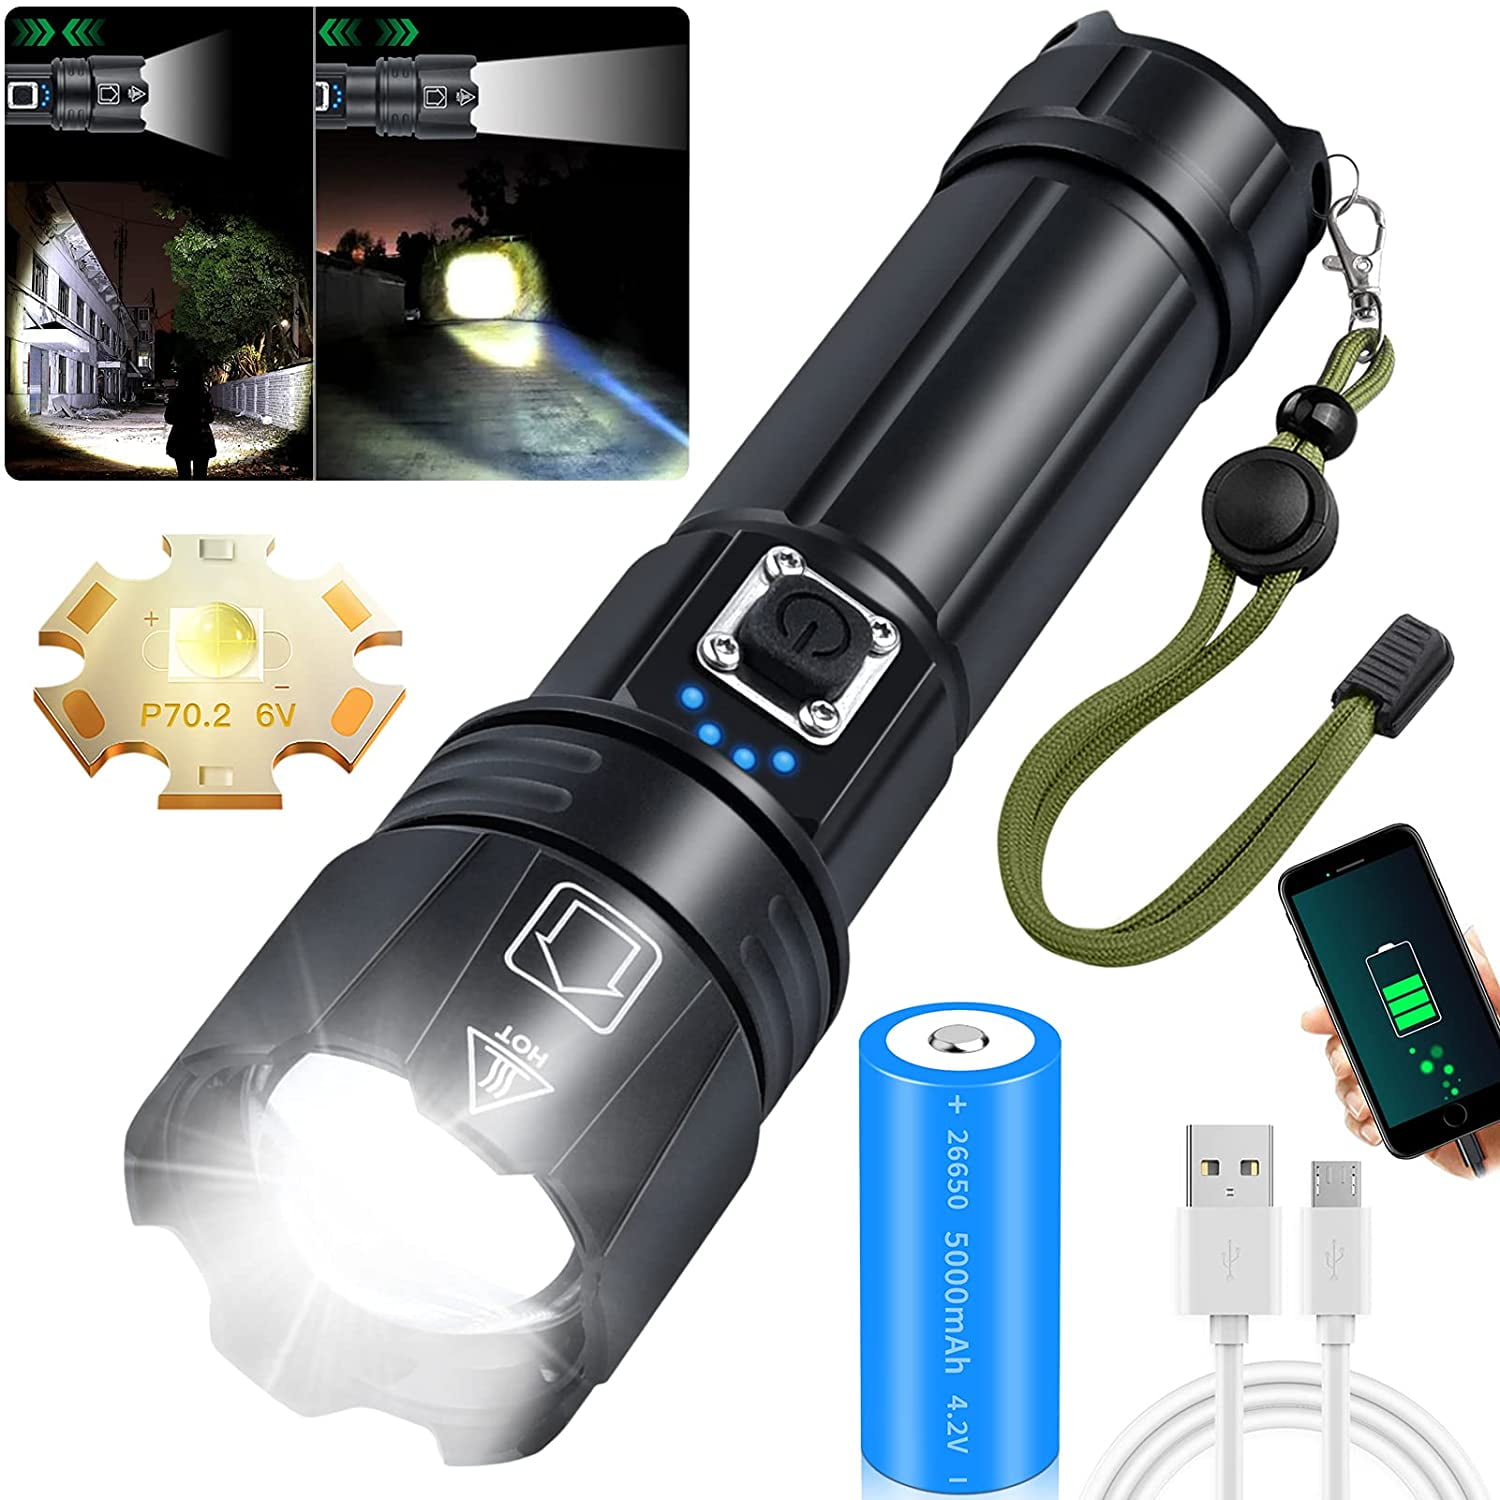 Handheld Portable Flashlight with Zoom IPX4 Lightweight Compact Five Modes 